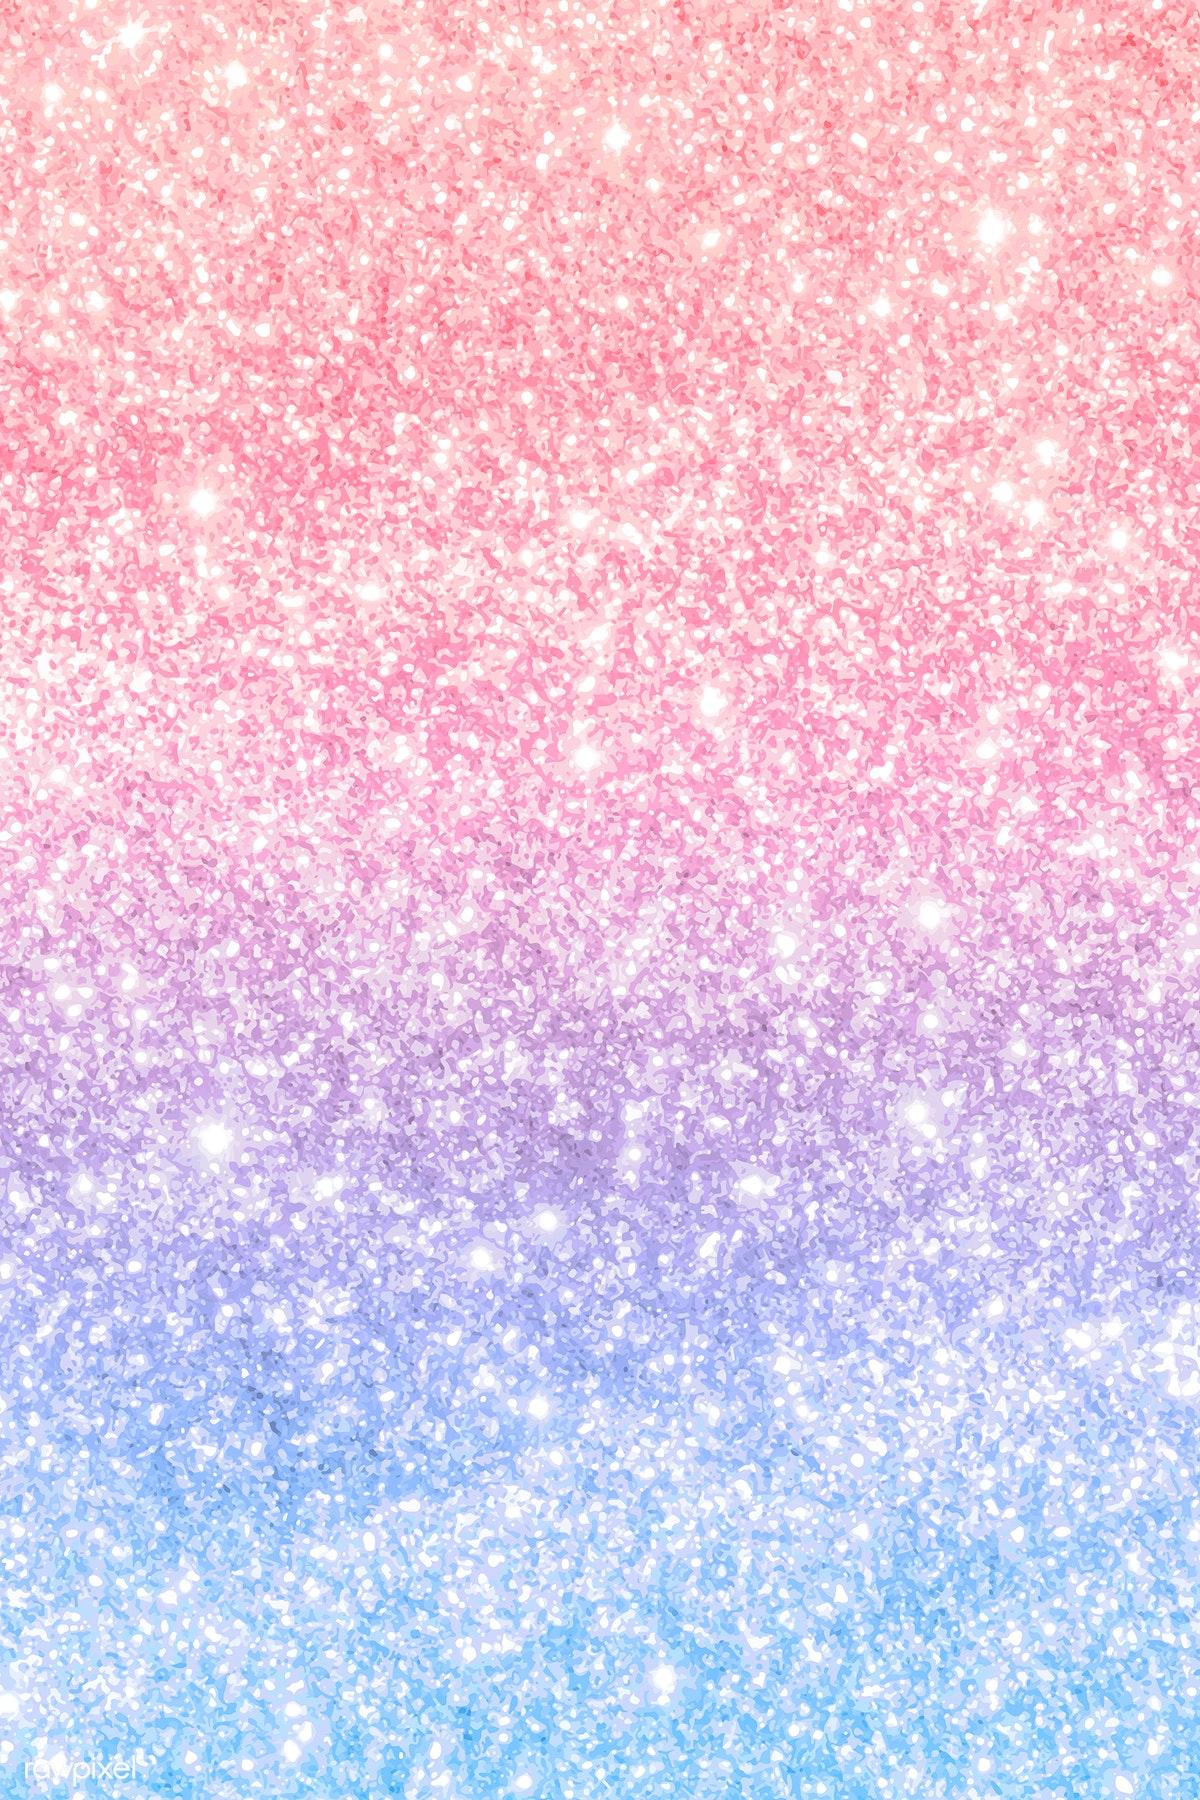 Light Pink Glitter Wallpapers - Wallpaper Cave
 Pink And Blue Sparkle Background